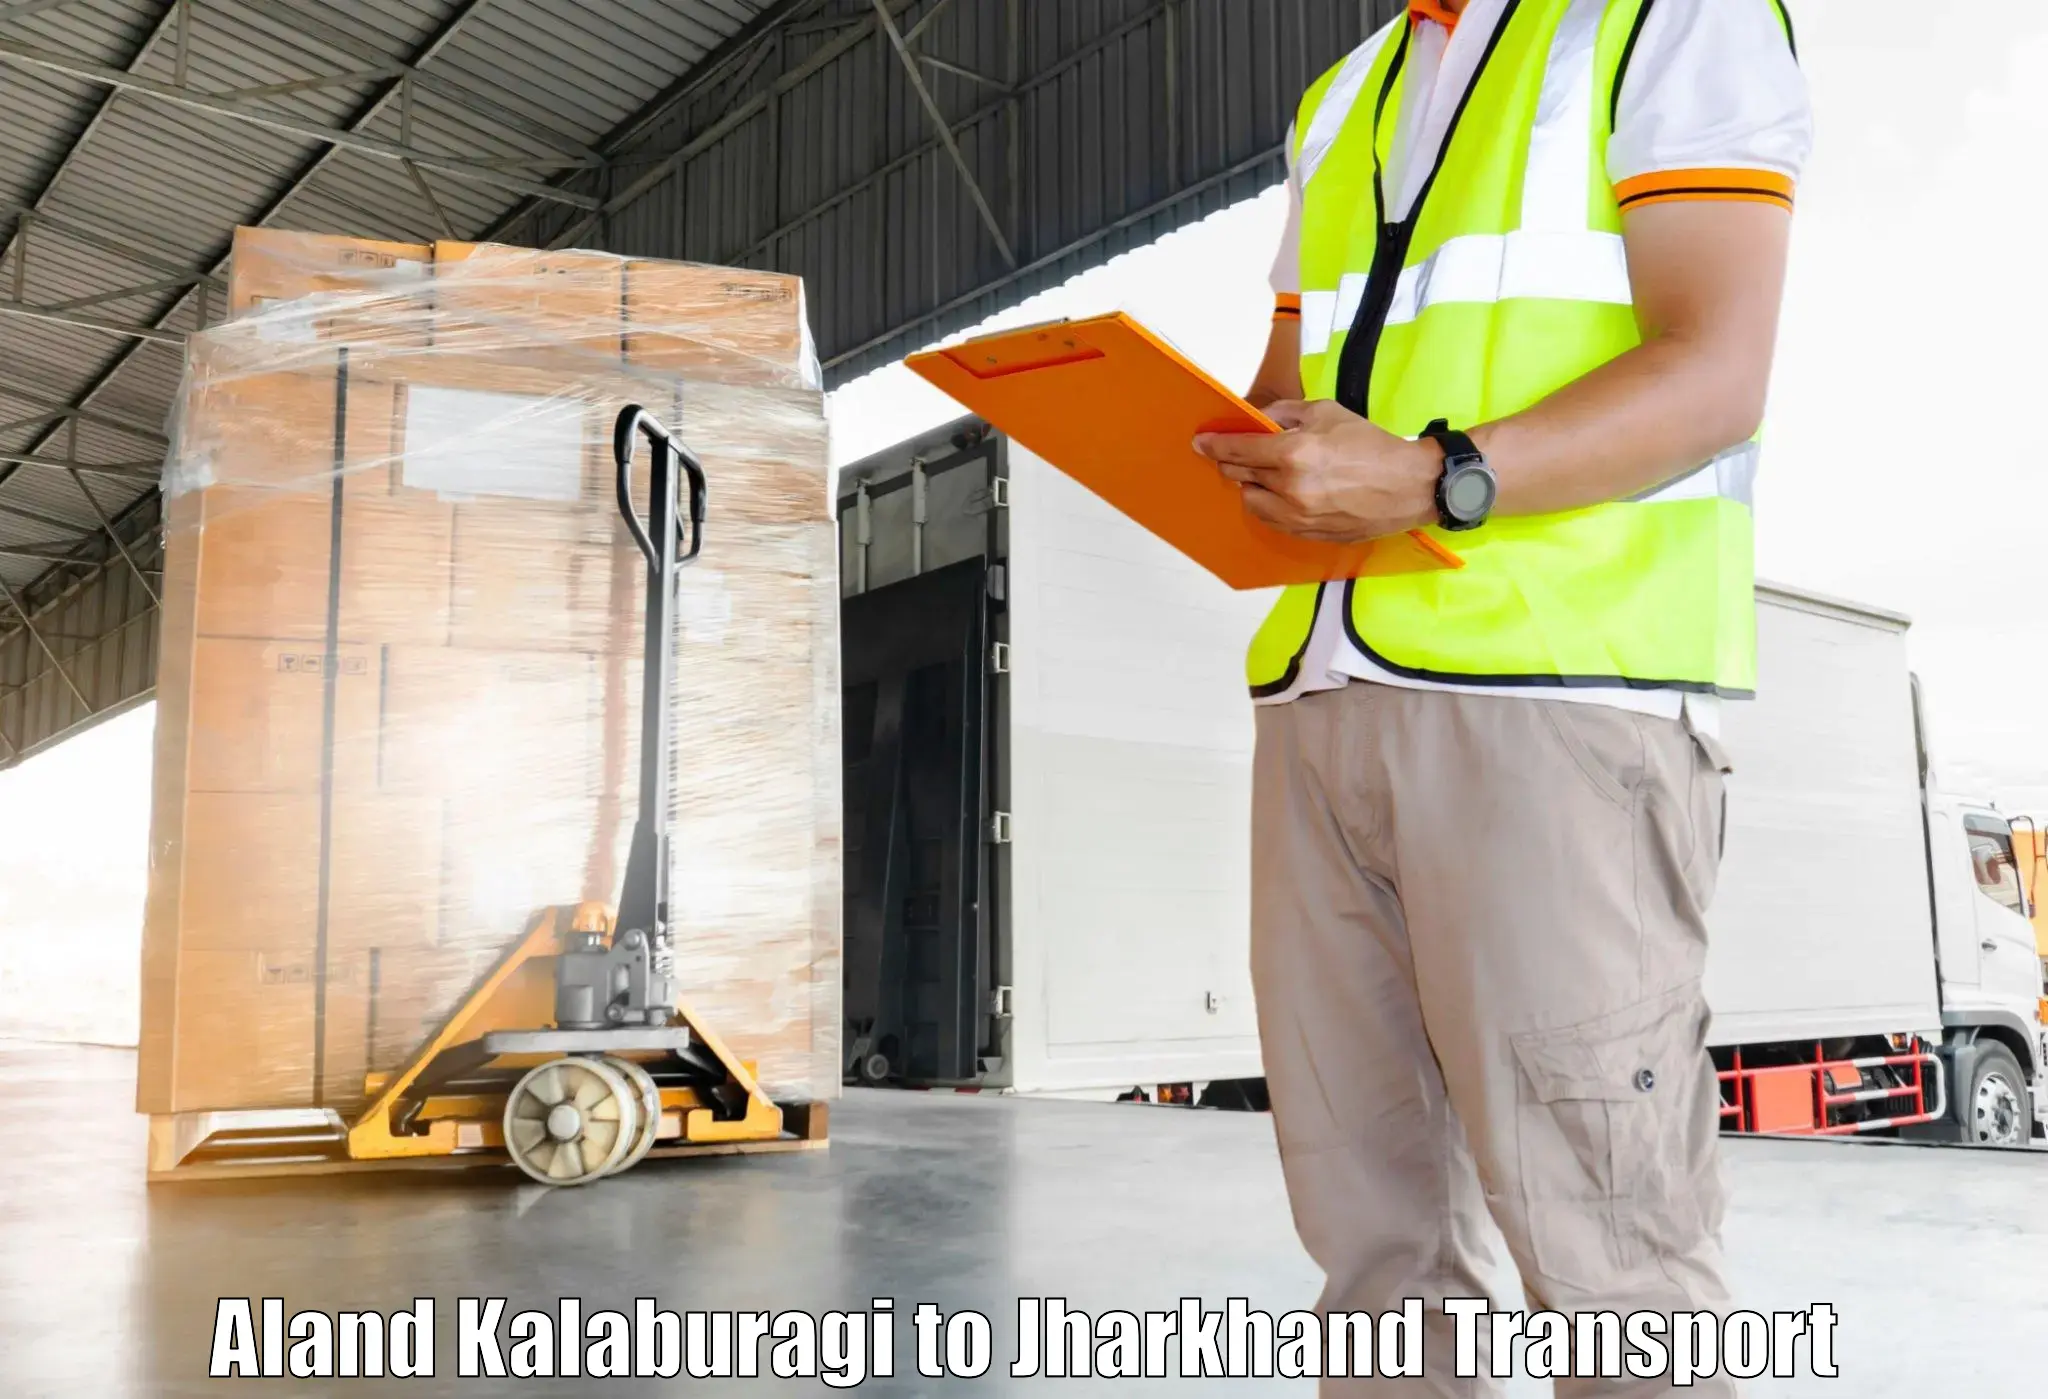 Package delivery services Aland Kalaburagi to Jamshedpur